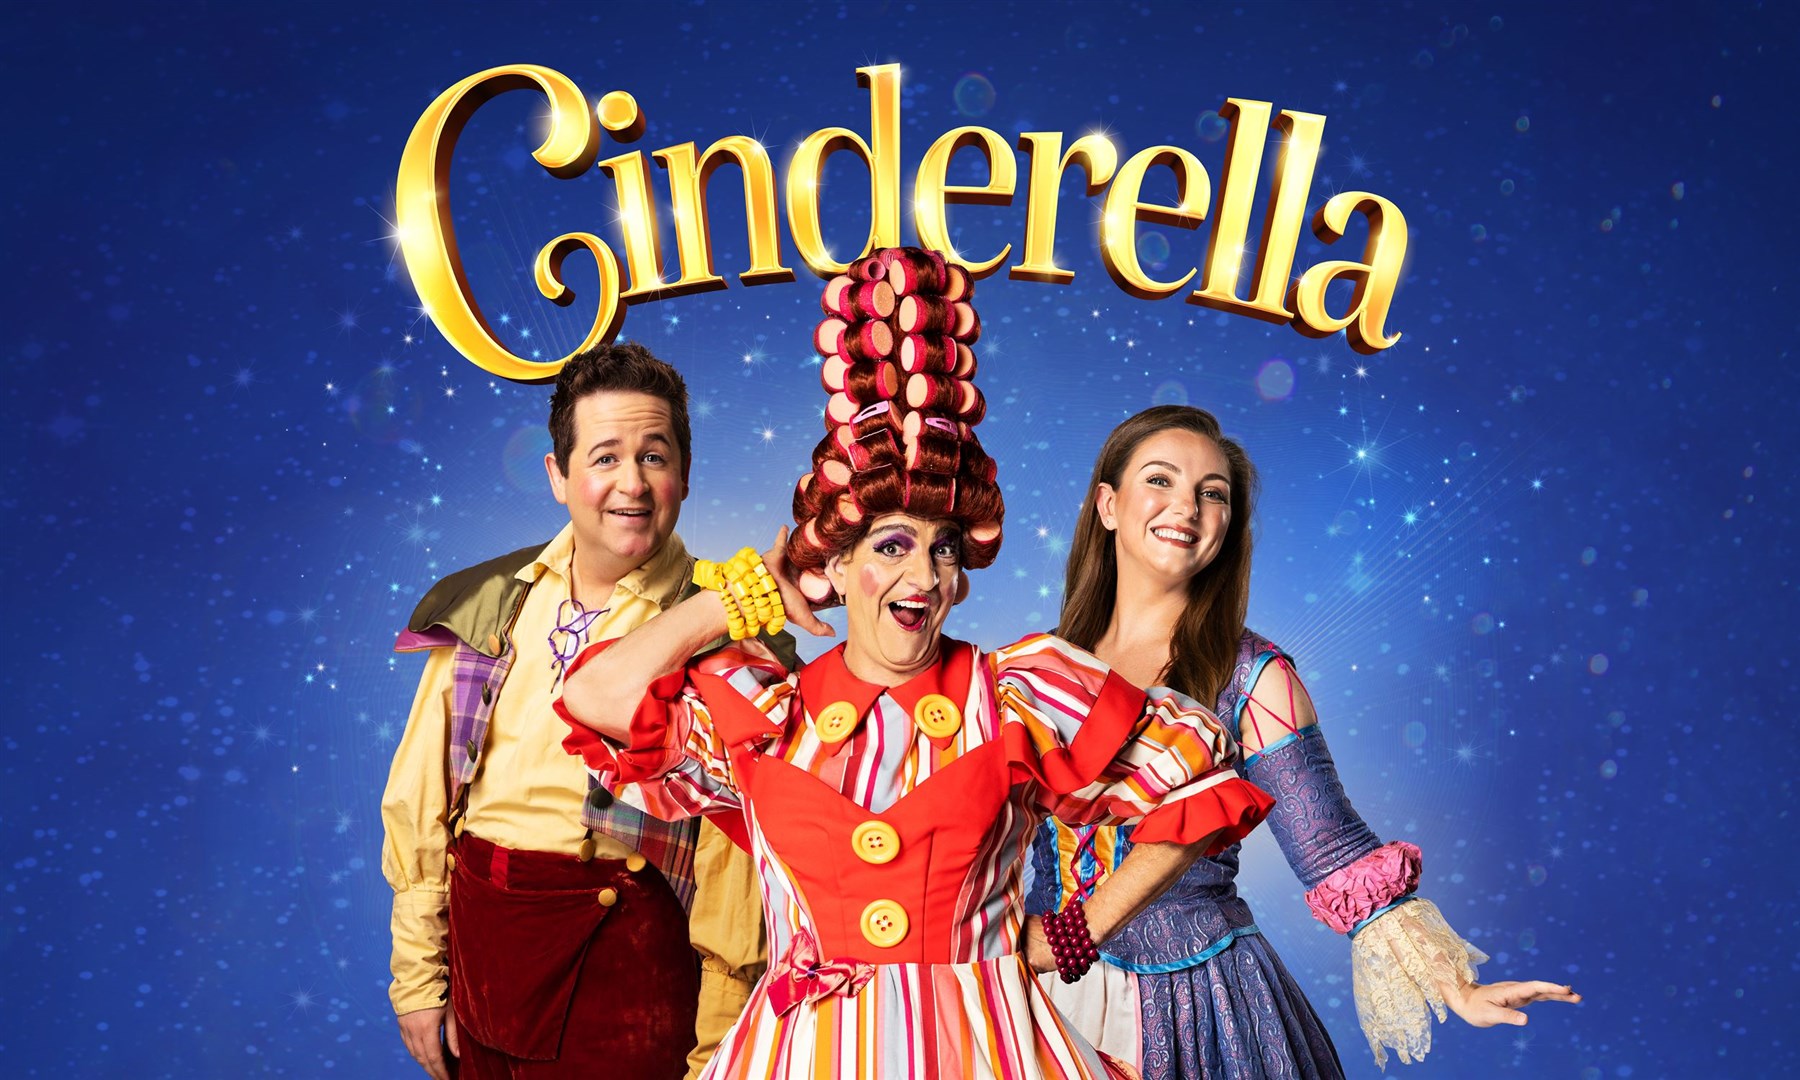 Cinderella with Ross Allan as Buttons, Steven Wren as Nanny Rosie and Jen Neil as Cinderella.